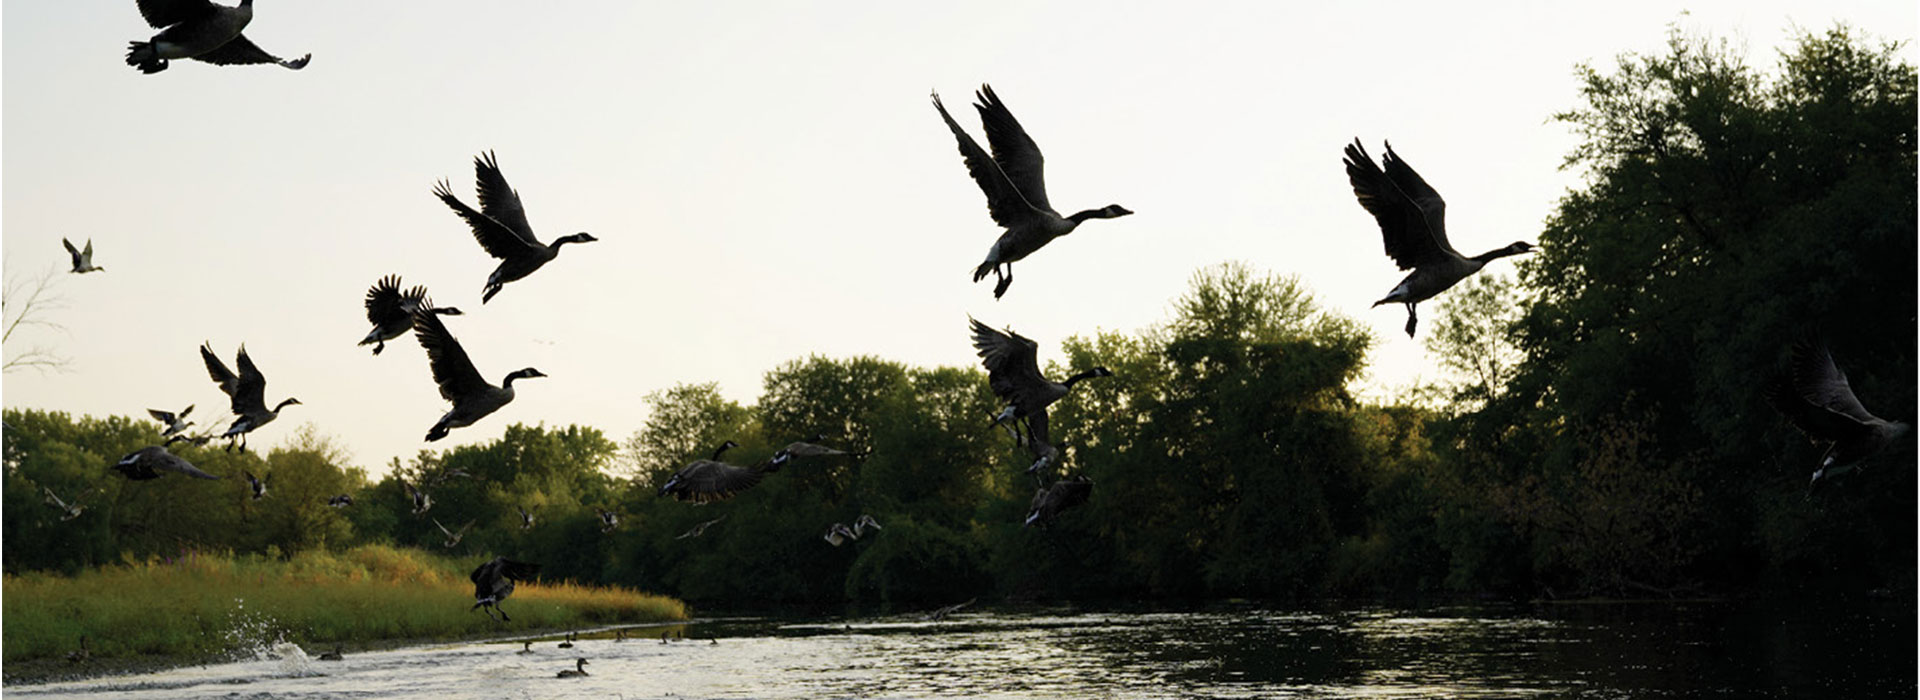 Geese in flight over a river